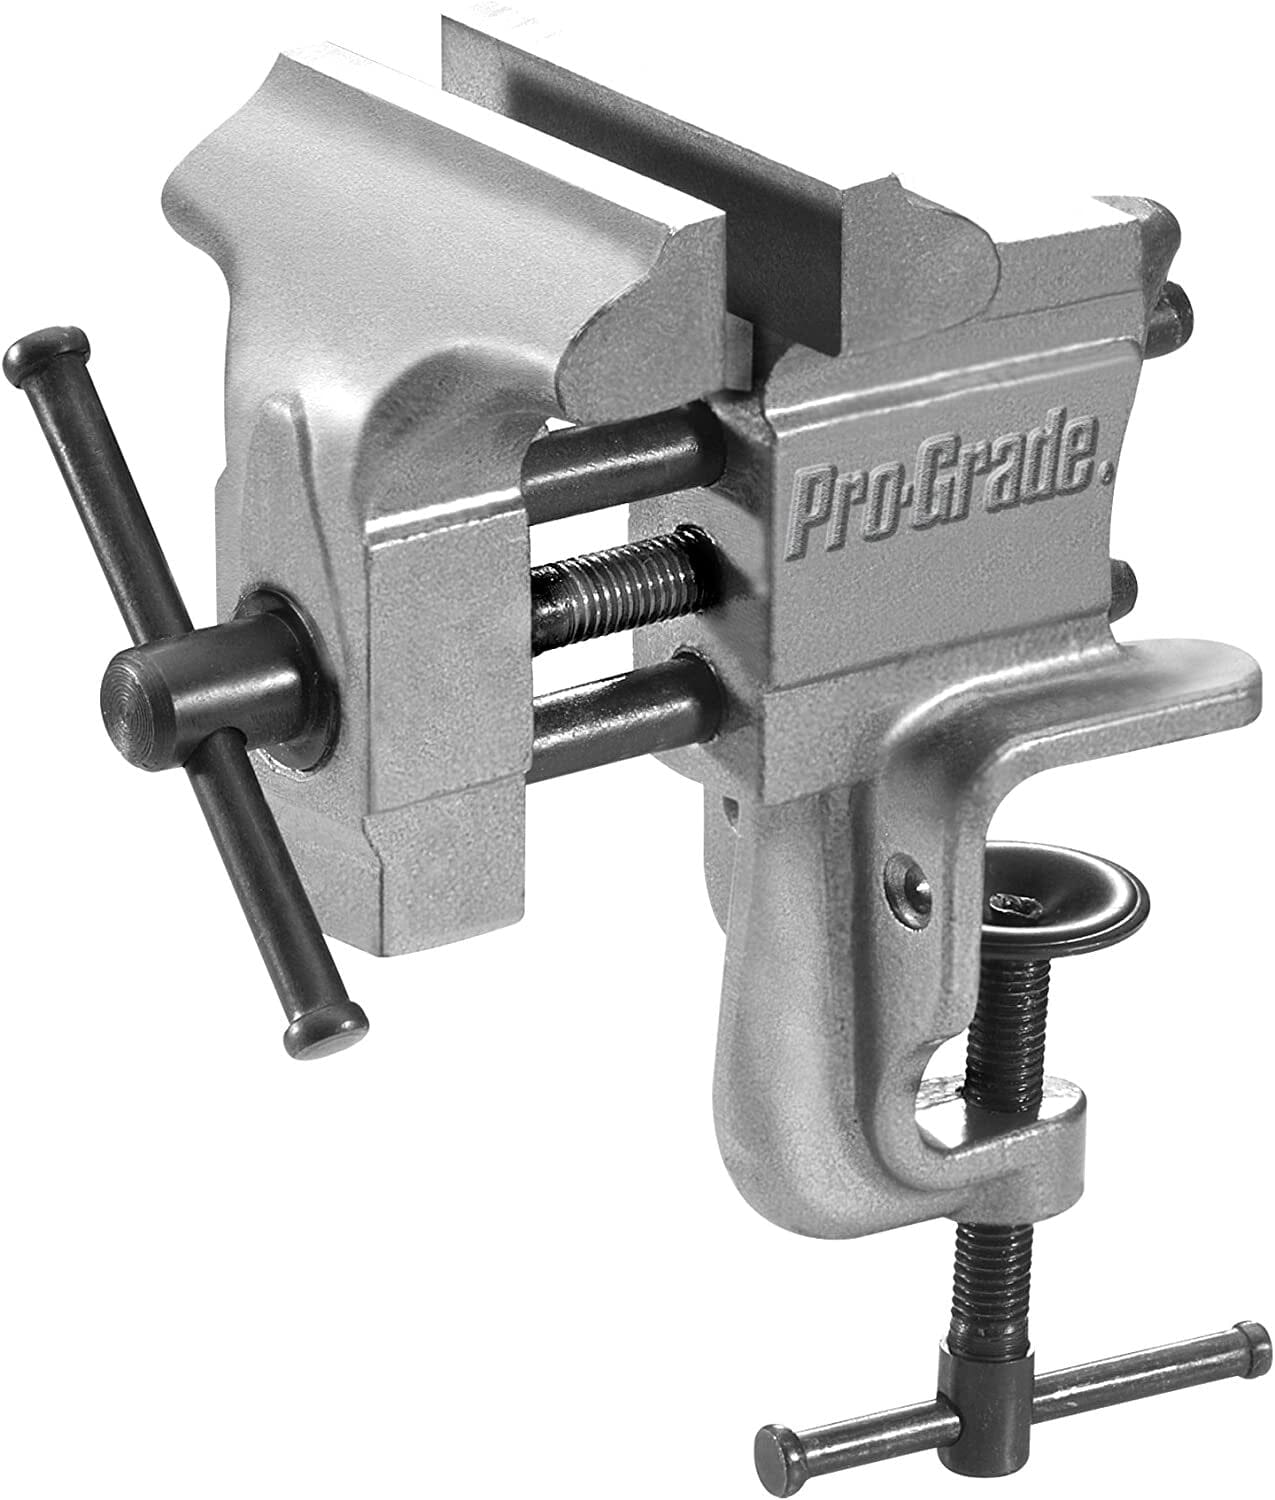 Allied Bench Vice - Clamp Type Pro-Grade #59109 75mm